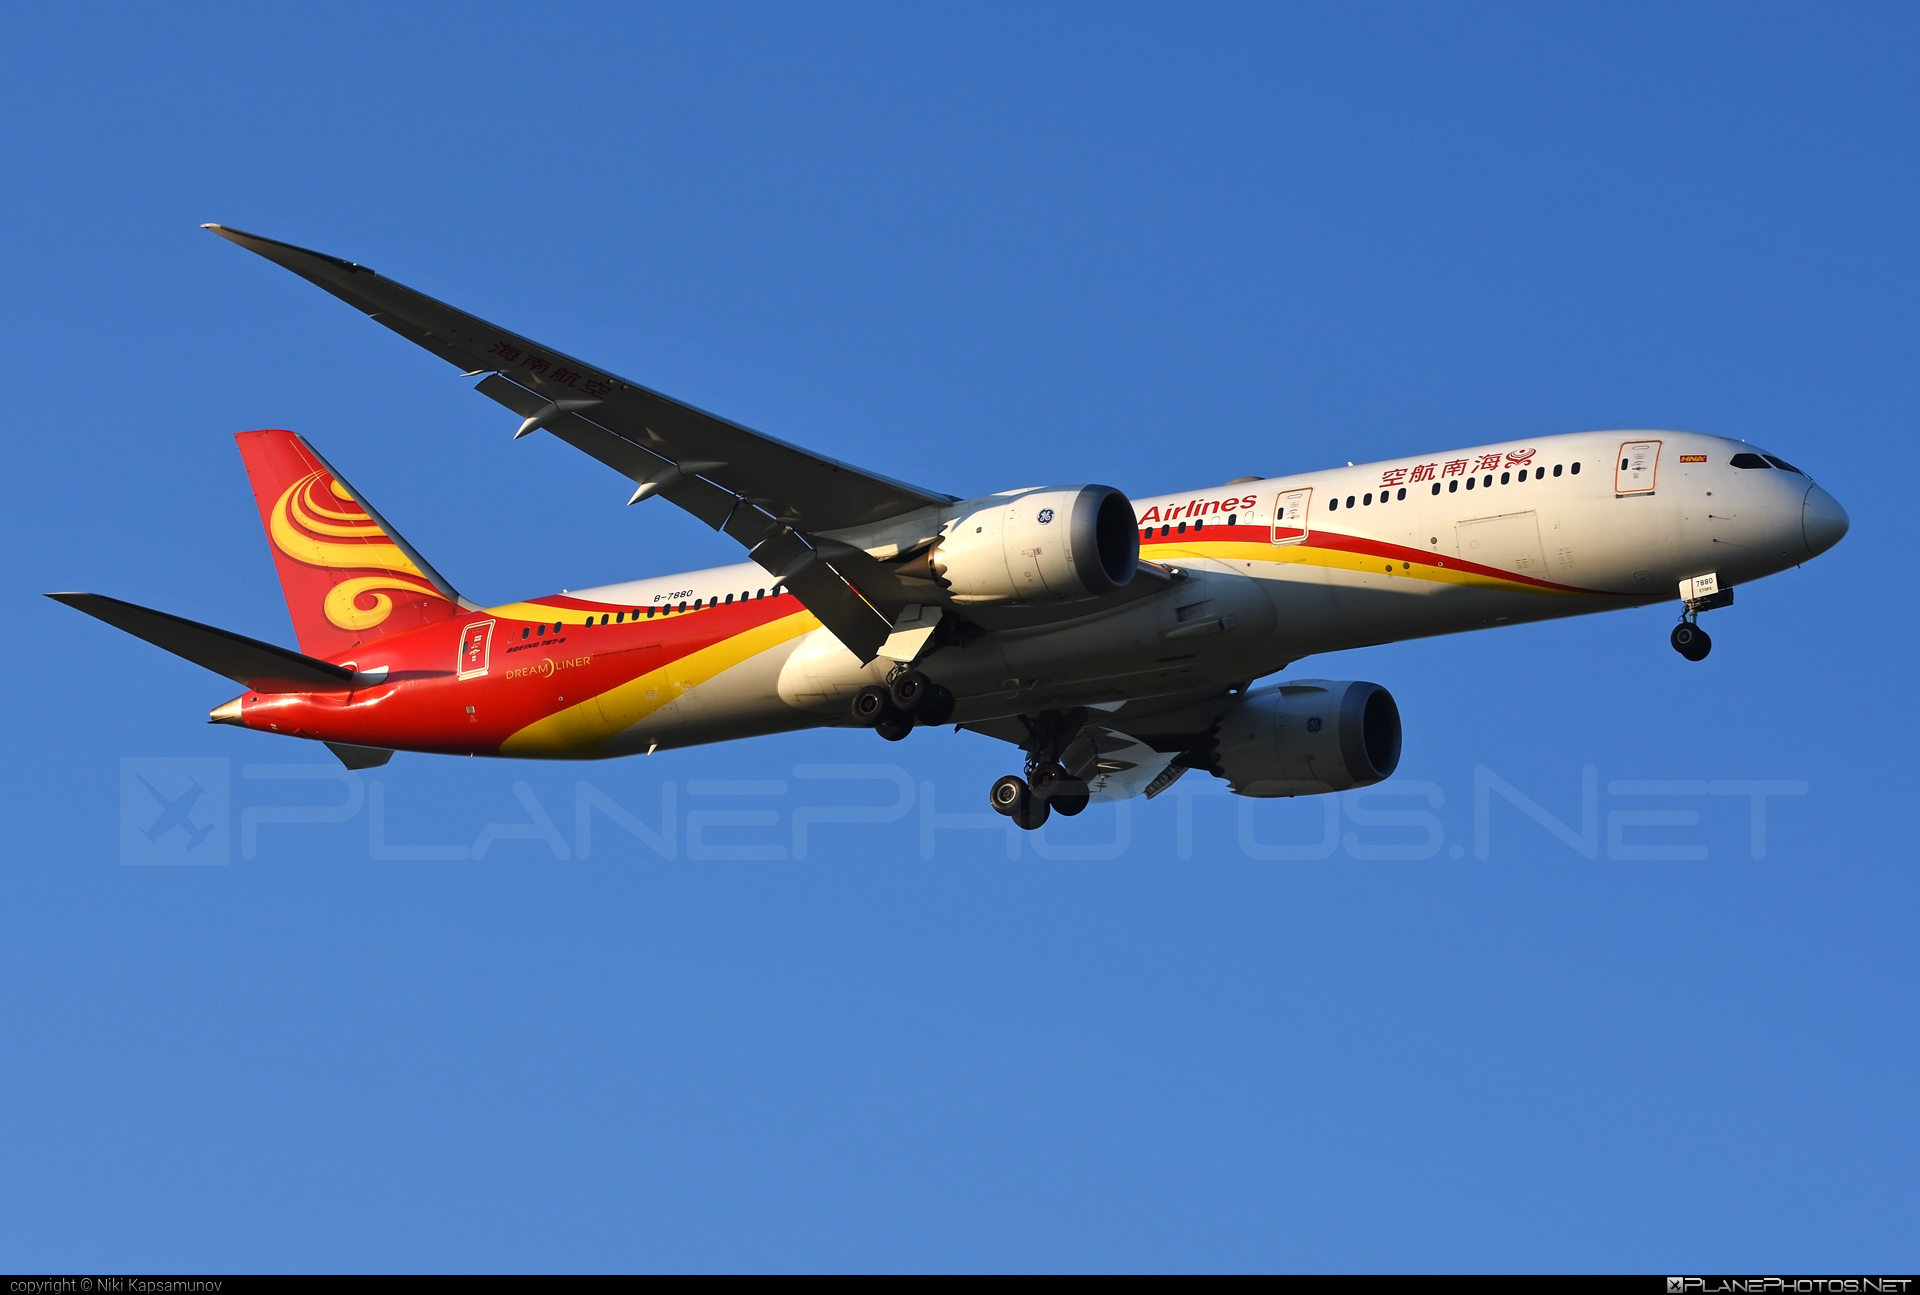 Boeing 787-9 Dreamliner - B-7880 operated by Hainan Airlines #b787 #boeing #boeing787 #dreamliner